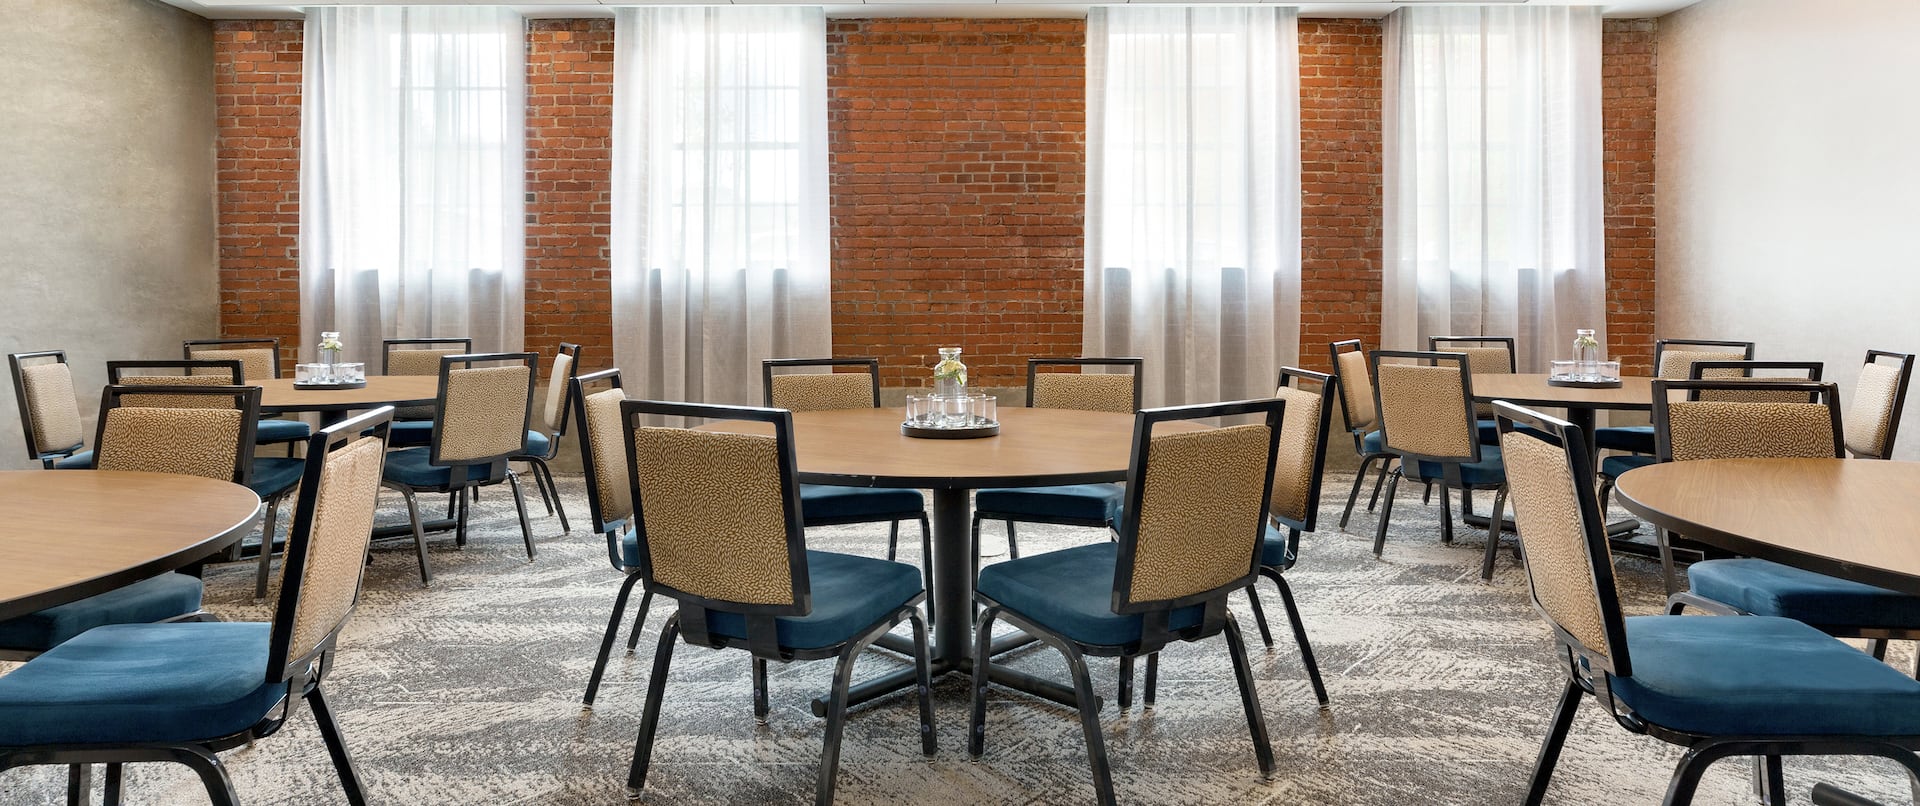 Meeting space with tables and chairs